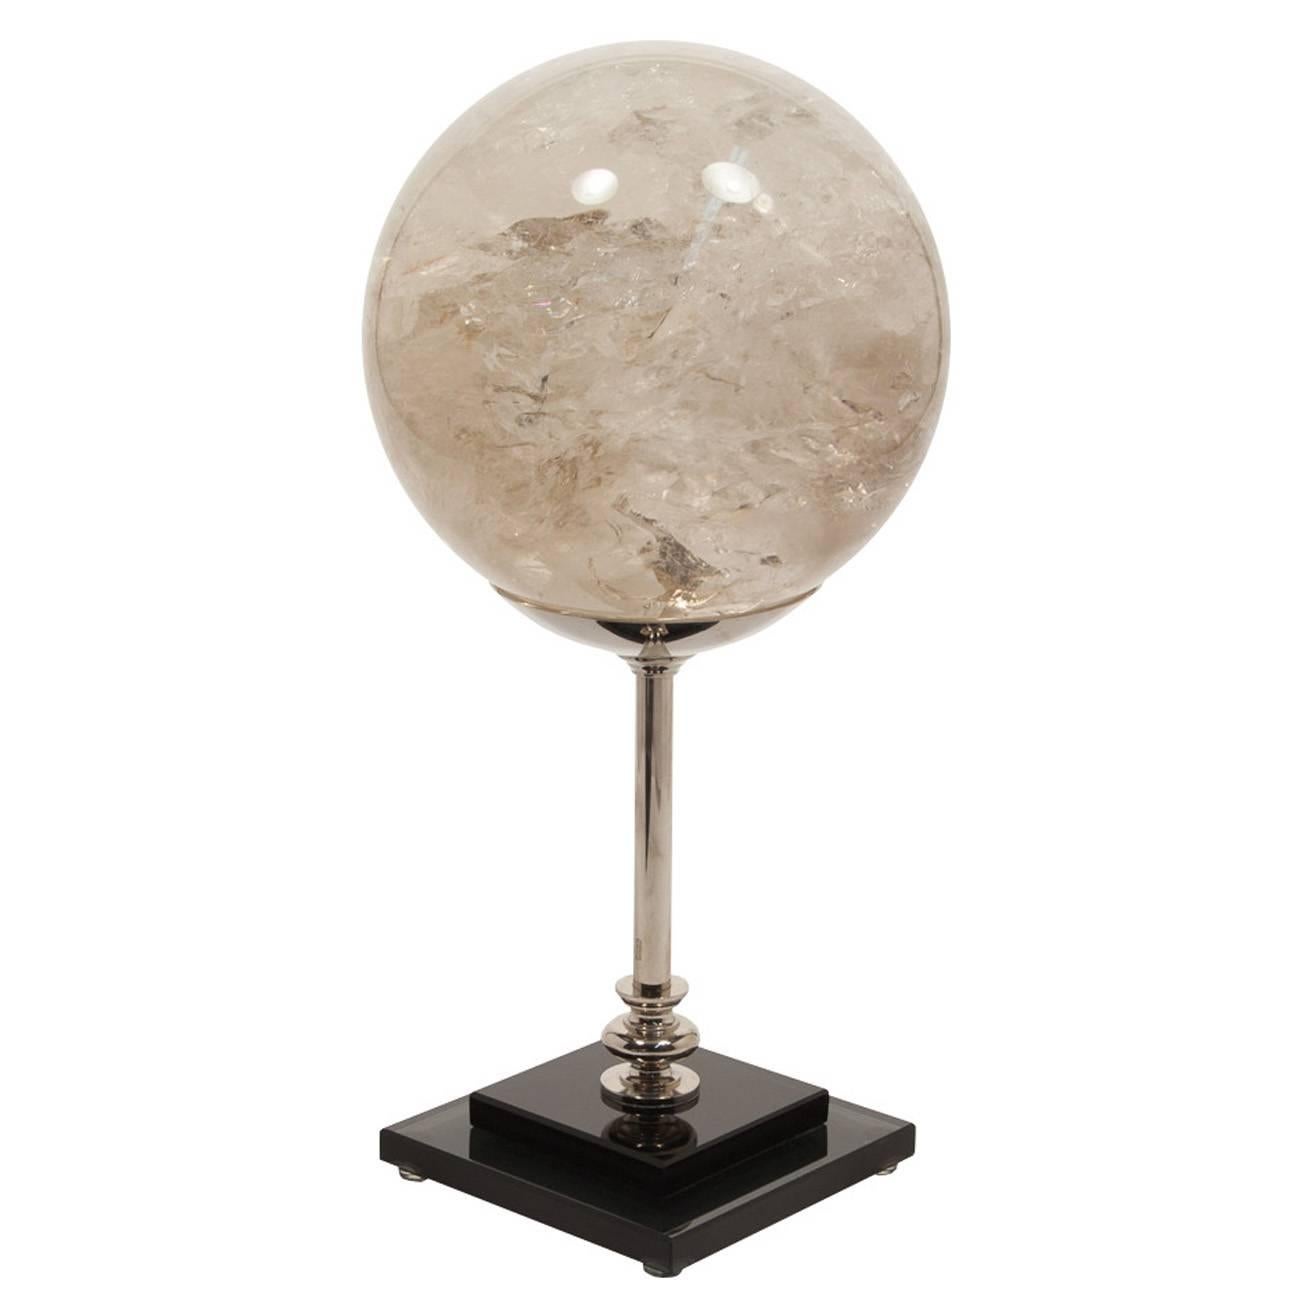 An extra large hand-carved white quartz sphere on a nickel-plated Stand with a black glass base.